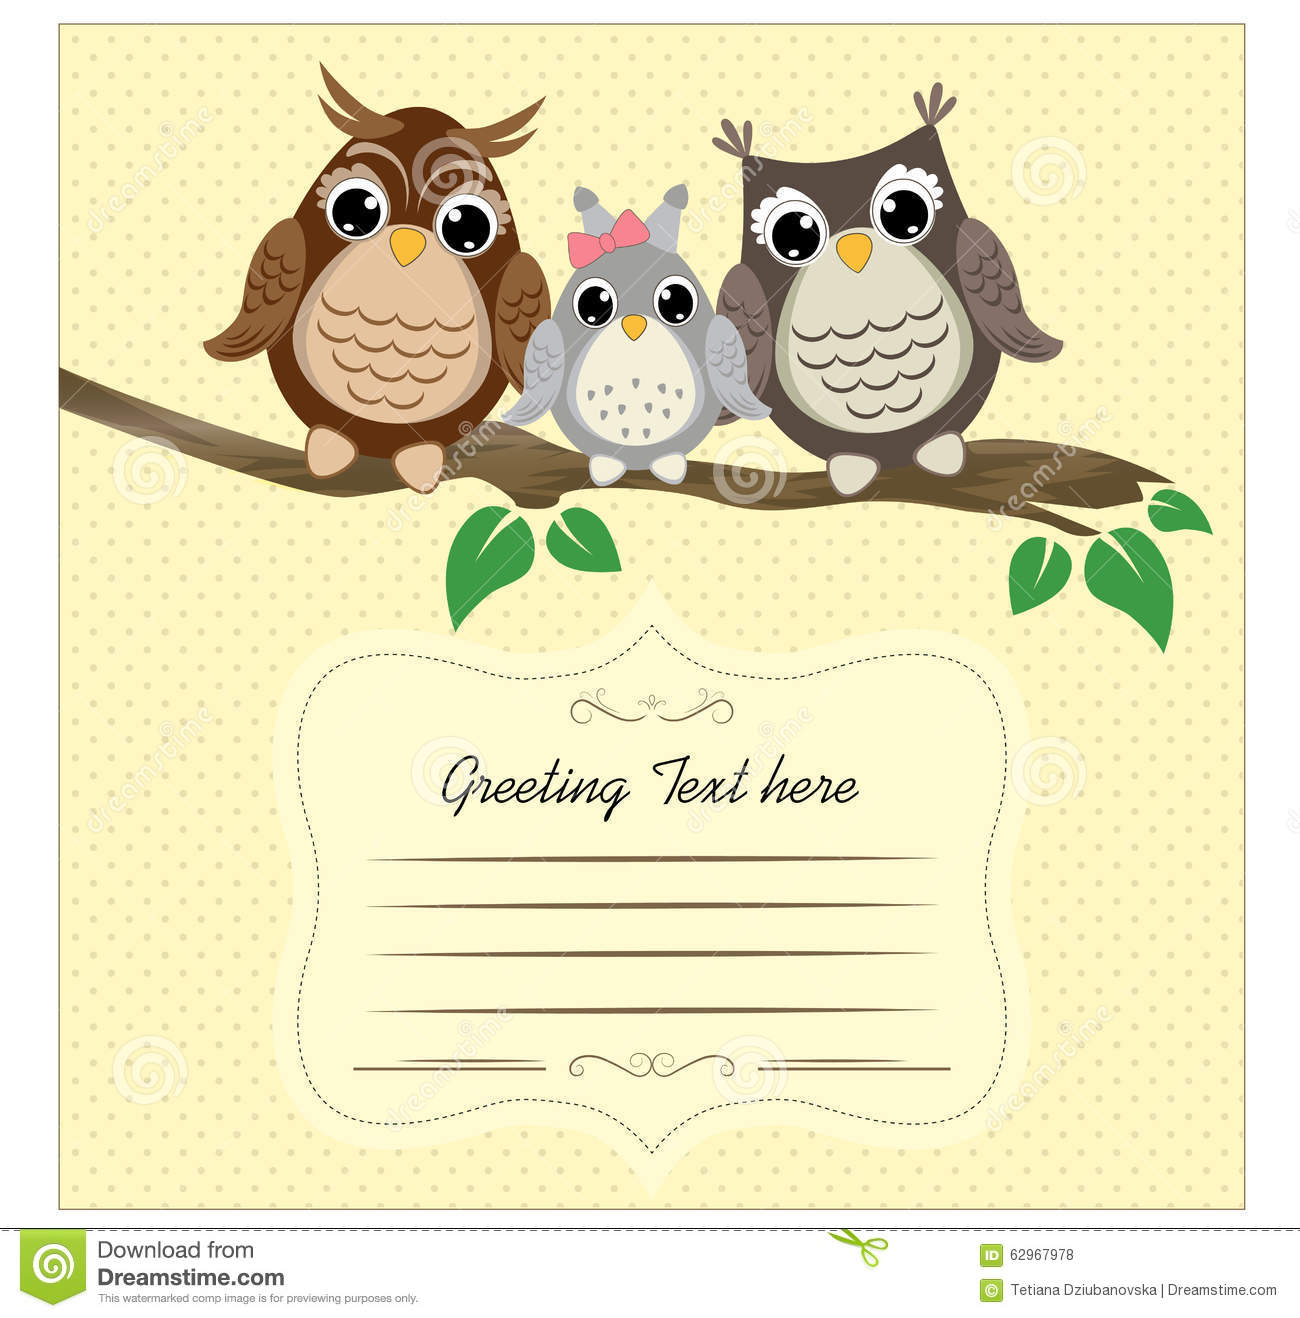 Book Cover Design  Vector Background With Family Of Owls On The Branch